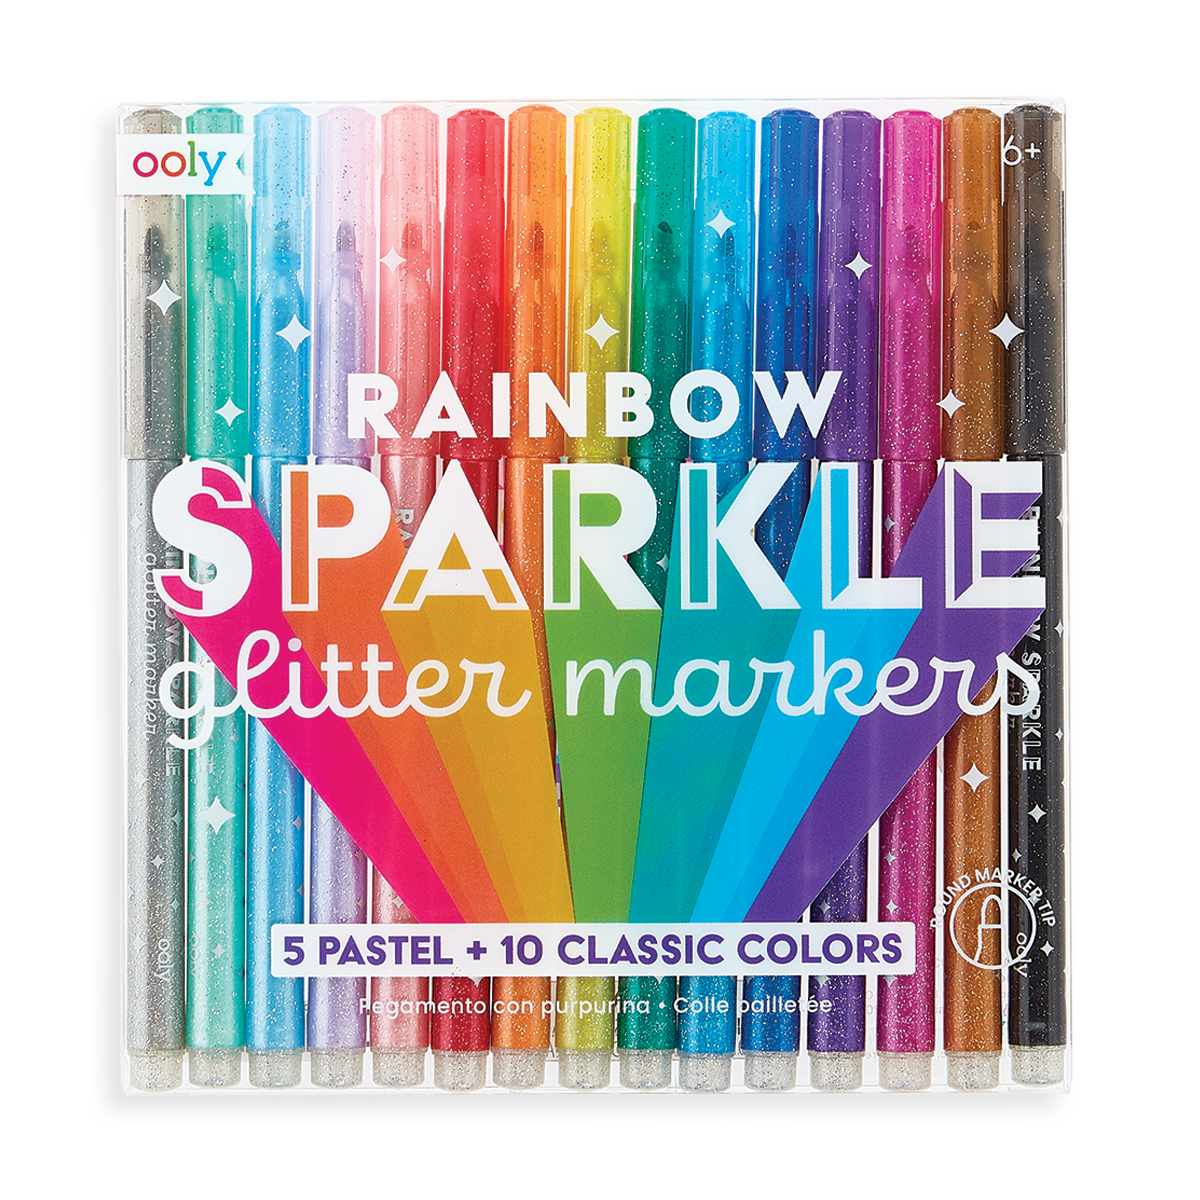 OOLY Rainbow Sparkle Glitter Markers - Set of 15 Markers